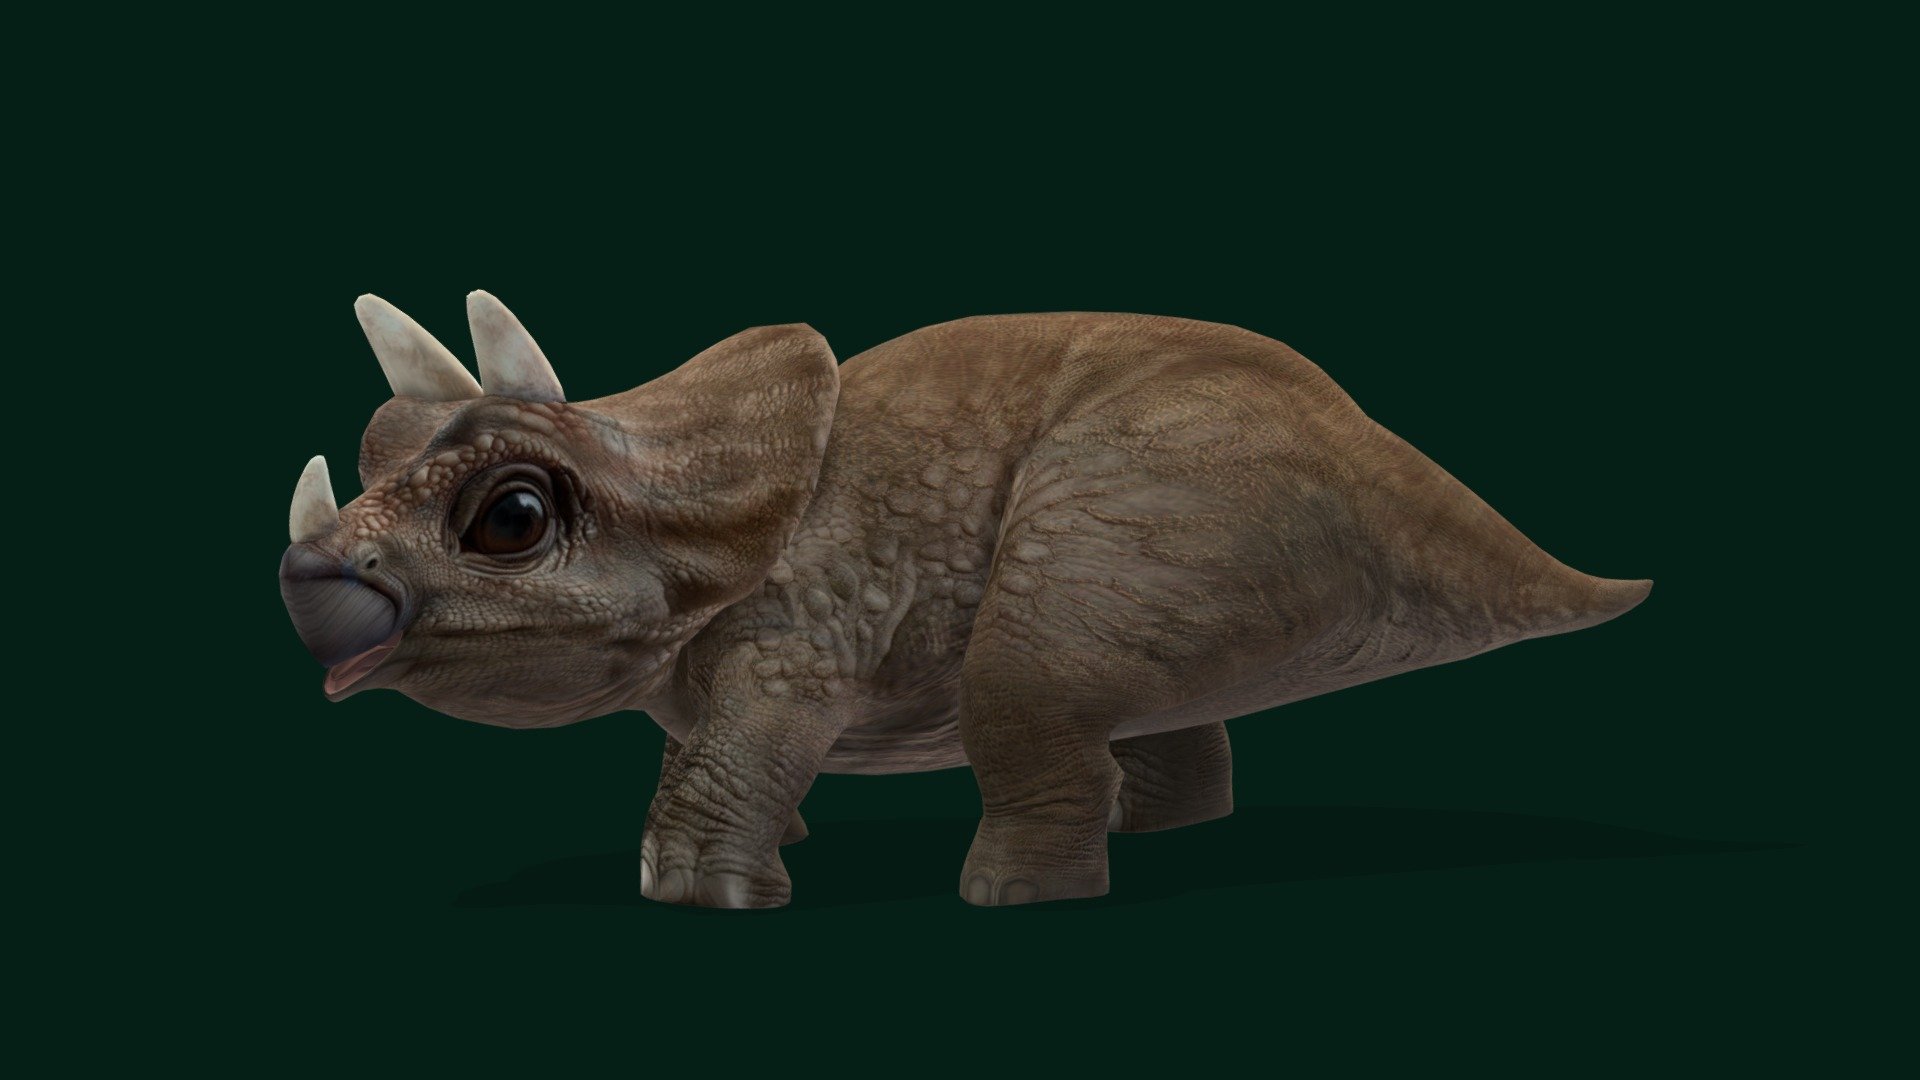 Triceratops Baby Dinosaurs ,Cub (Small Dinosaur) 

Triceratops-horridus Animal reptiles 

1 Draw Calls

Game Ready Asset

Subdivision Surface Ready

Single - Animations

4K PBR Textures Materials

Unreal FBX (Unreal 4,5 Plus)

Unity FBX

Blend File 3.6.5 LTS

USDZ File (AR Ready). Real Scale Dimension (Xcode ,Reality Composer, Keynote Ready)

Textures Files

GLB File (Unreal 5.1 Plus Native Support)

Gltf File ( Spark AR, Lens Studio(SnapChat) , Effector(Tiktok) , Spline, Play Canvas,Omiverse ) Compatible

Triangles -12163
Faces -6652
Edges -12765
Vertices -6123

Diffuse, Metallic, Roughness , Normal Map ,Specular Map,AO

Triceratops is a genus of chasmosaurine ceratopsian dinosaur that lived during the late Maastrichtian age of the Late Cretaceous period, about 68 to 66 million years ago in what is now western North America. 
Eats: Cycads, Palms
Fossils: Yoshi's Trike, Raymond, AMNH 5039, Kelsey, Hatcher
Lived: 83.5 million years ago - 66 million years ago (Campanian - Maastrichtian) - Triceratops Baby Dinosaur Reptile - Buy Royalty Free 3D model by Nyilonelycompany 3d model